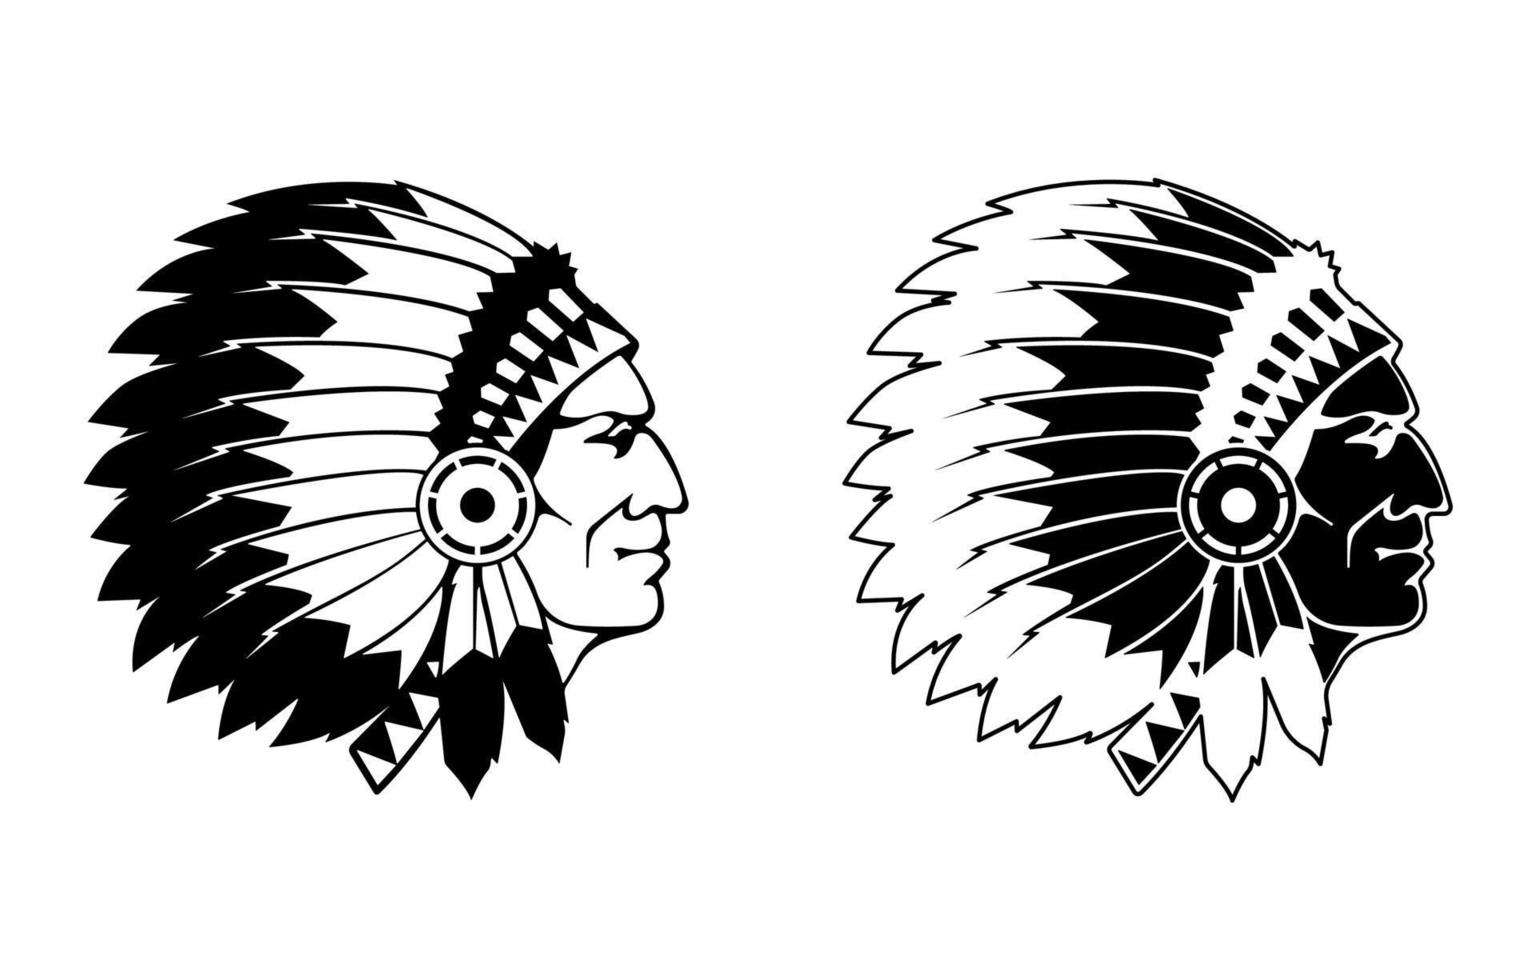 Native American Chief Face, American Indian Apache Head Silhouette illustration. vector